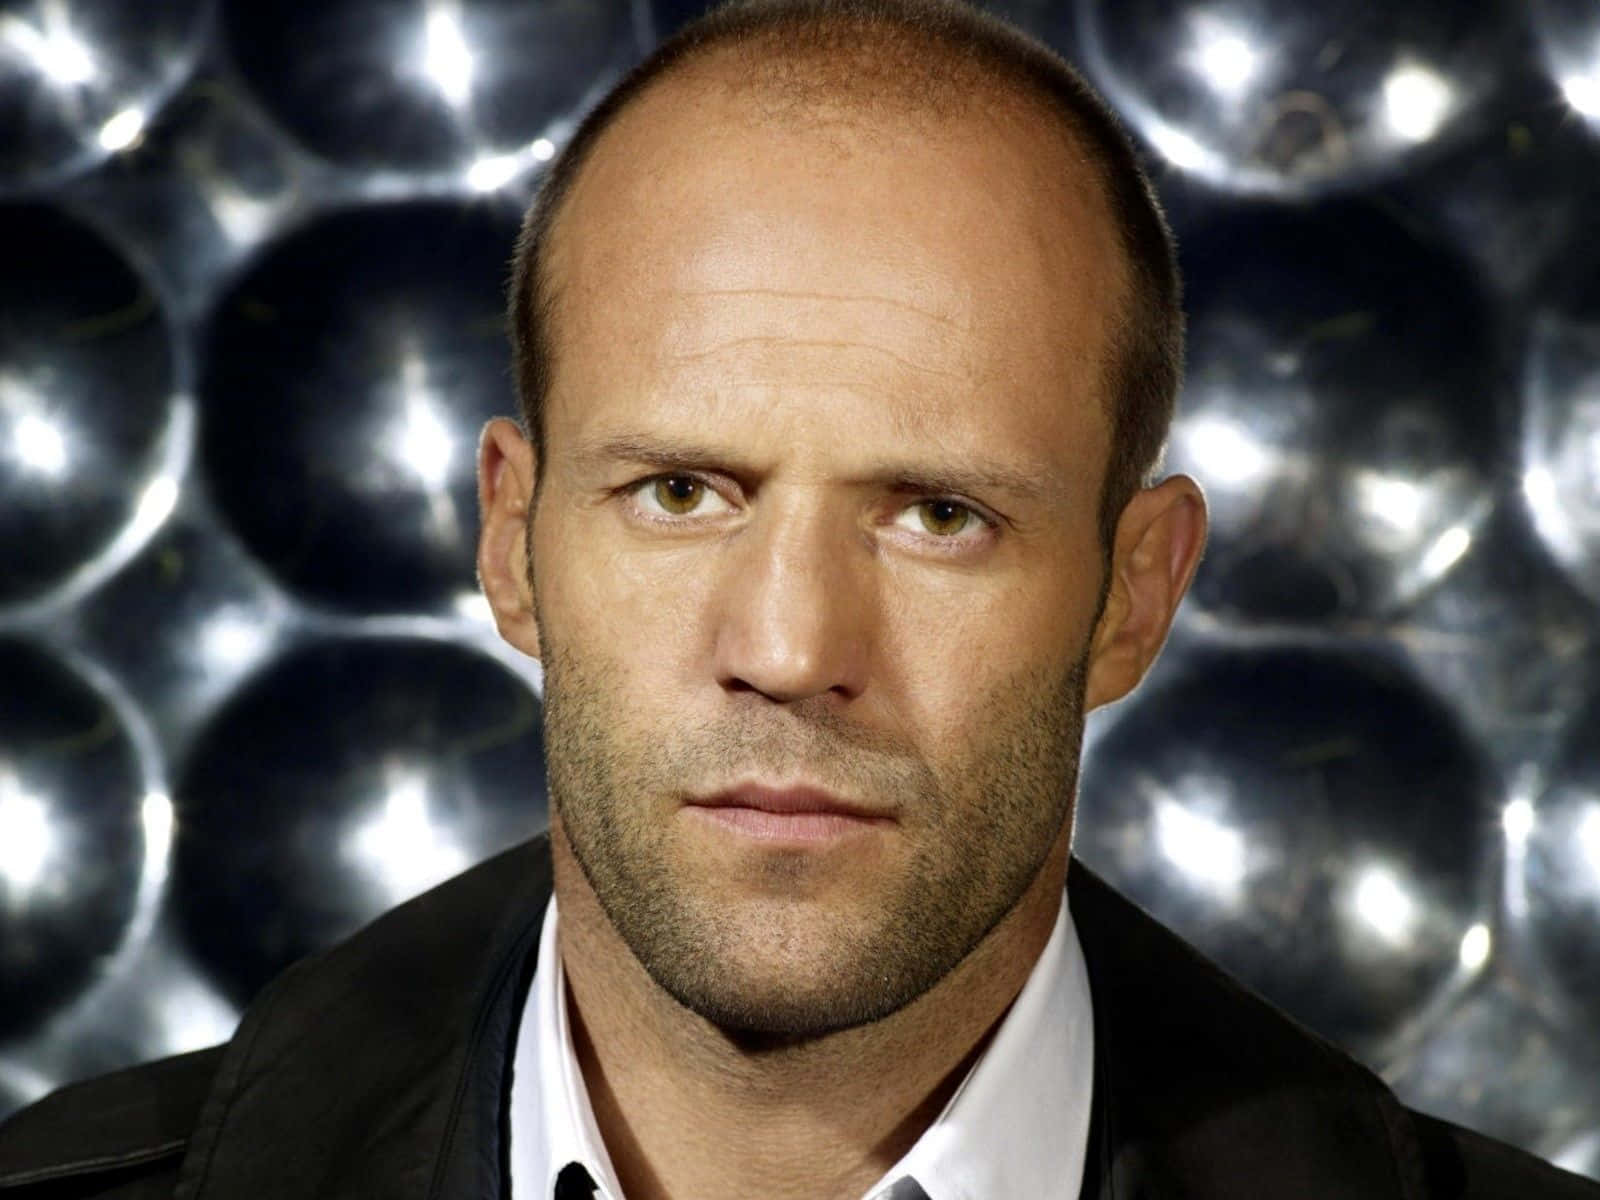 Jason Statham Exhibiting Confidence With His Iconic Bald Look Wallpaper